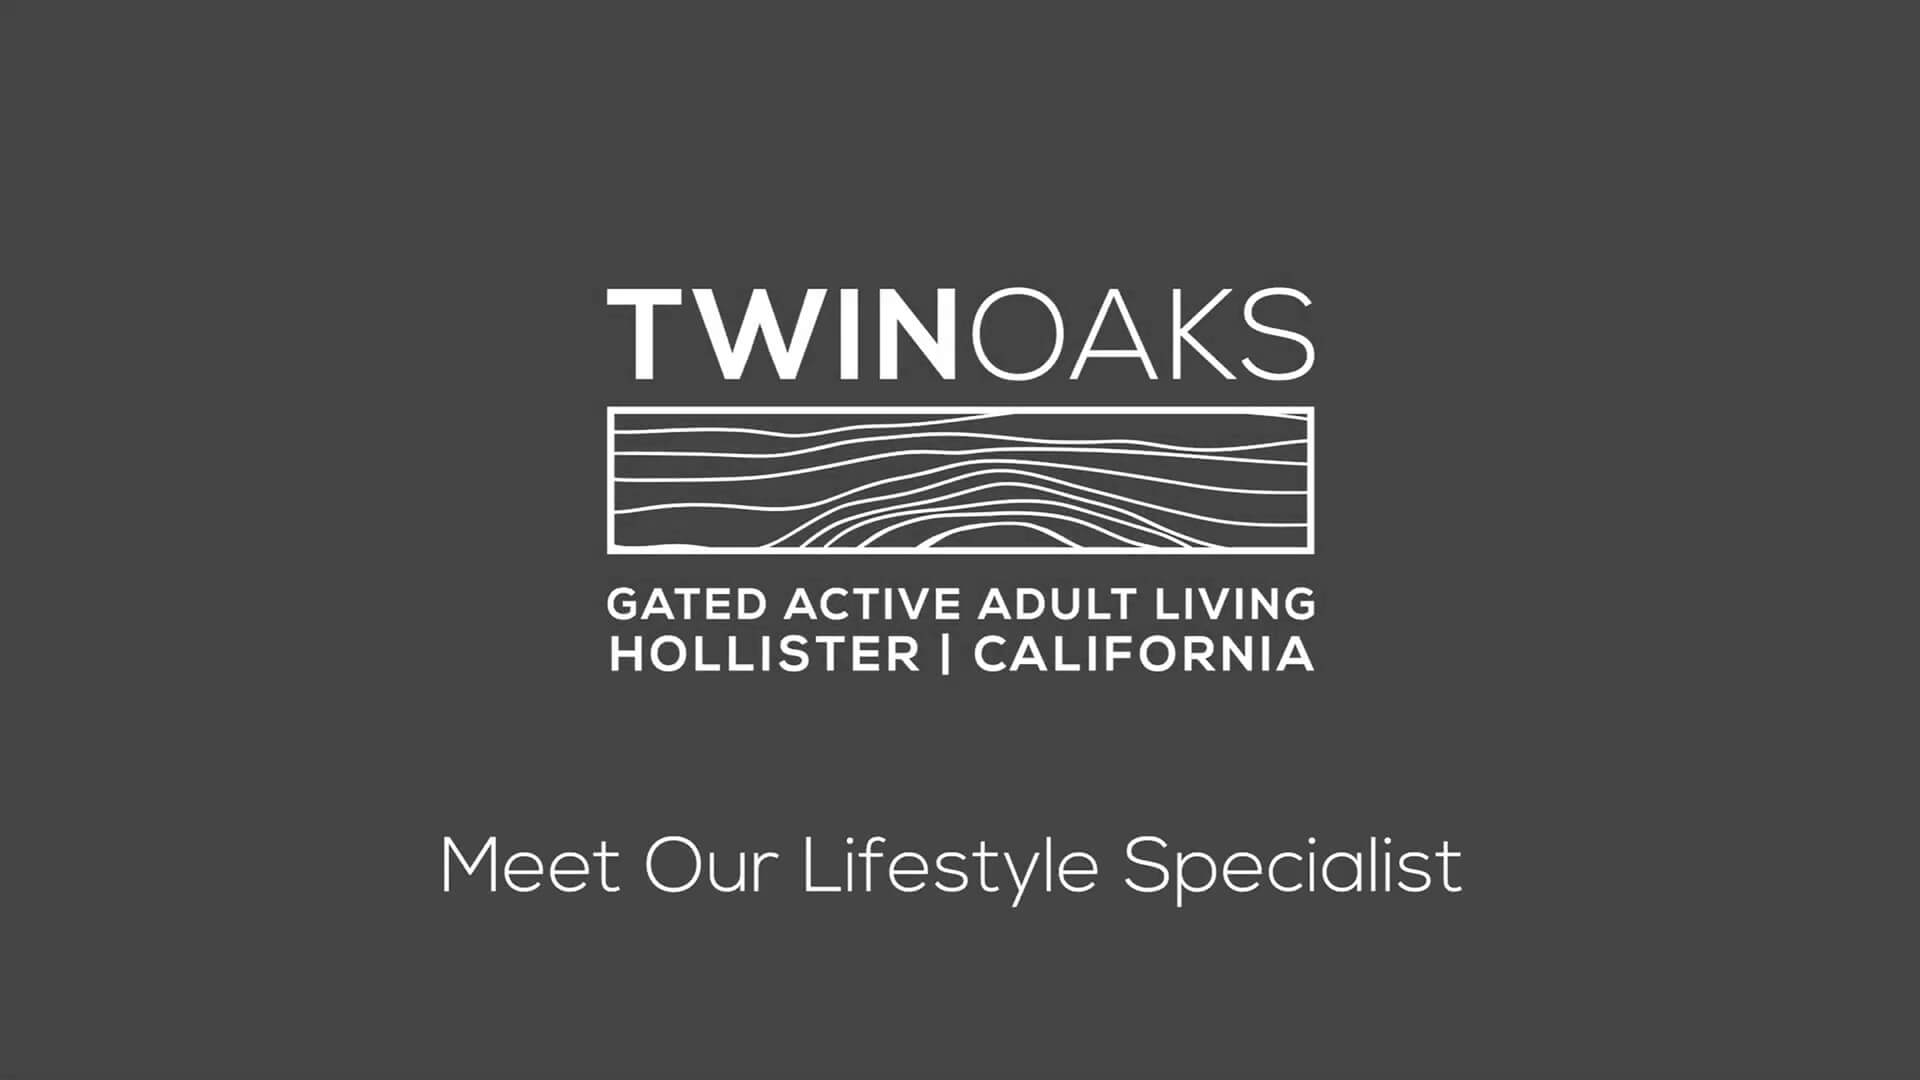 Video: Twin Oaks Gated Active Adult Living - Meet Our Lifestyle Specialist